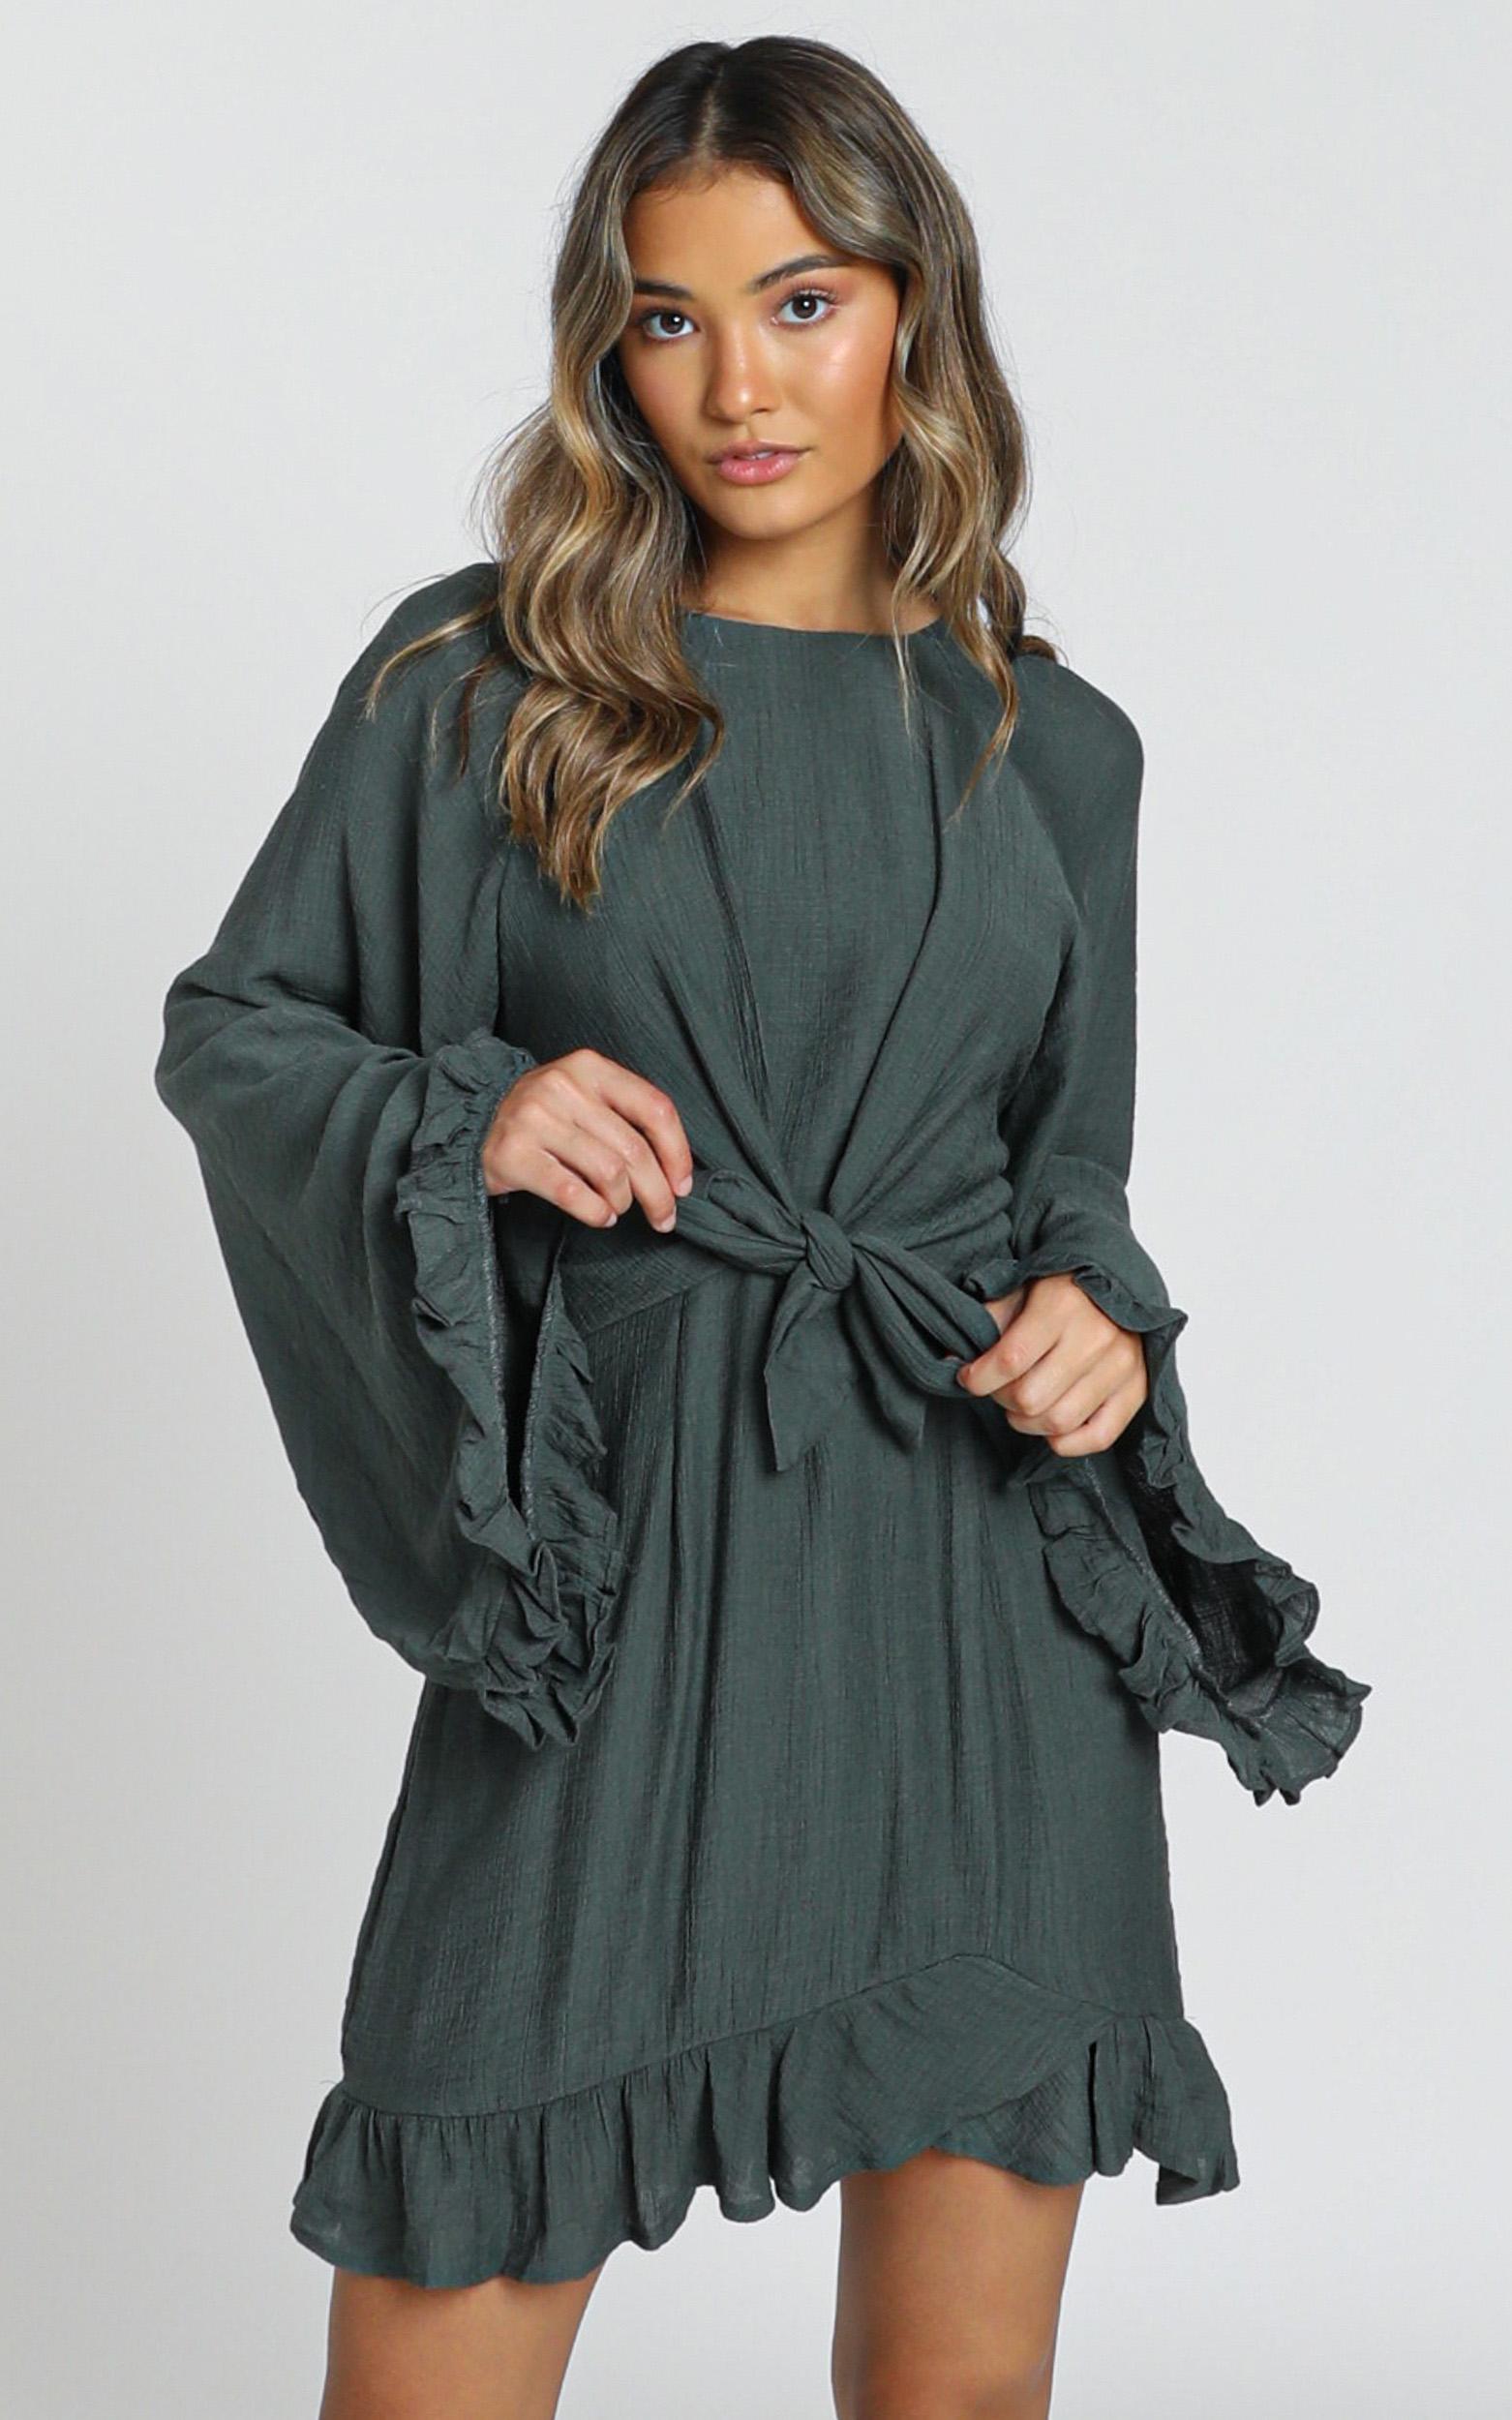 Ophelia Tie Front Dress in olive - 6 (XS), Green, hi-res image number null